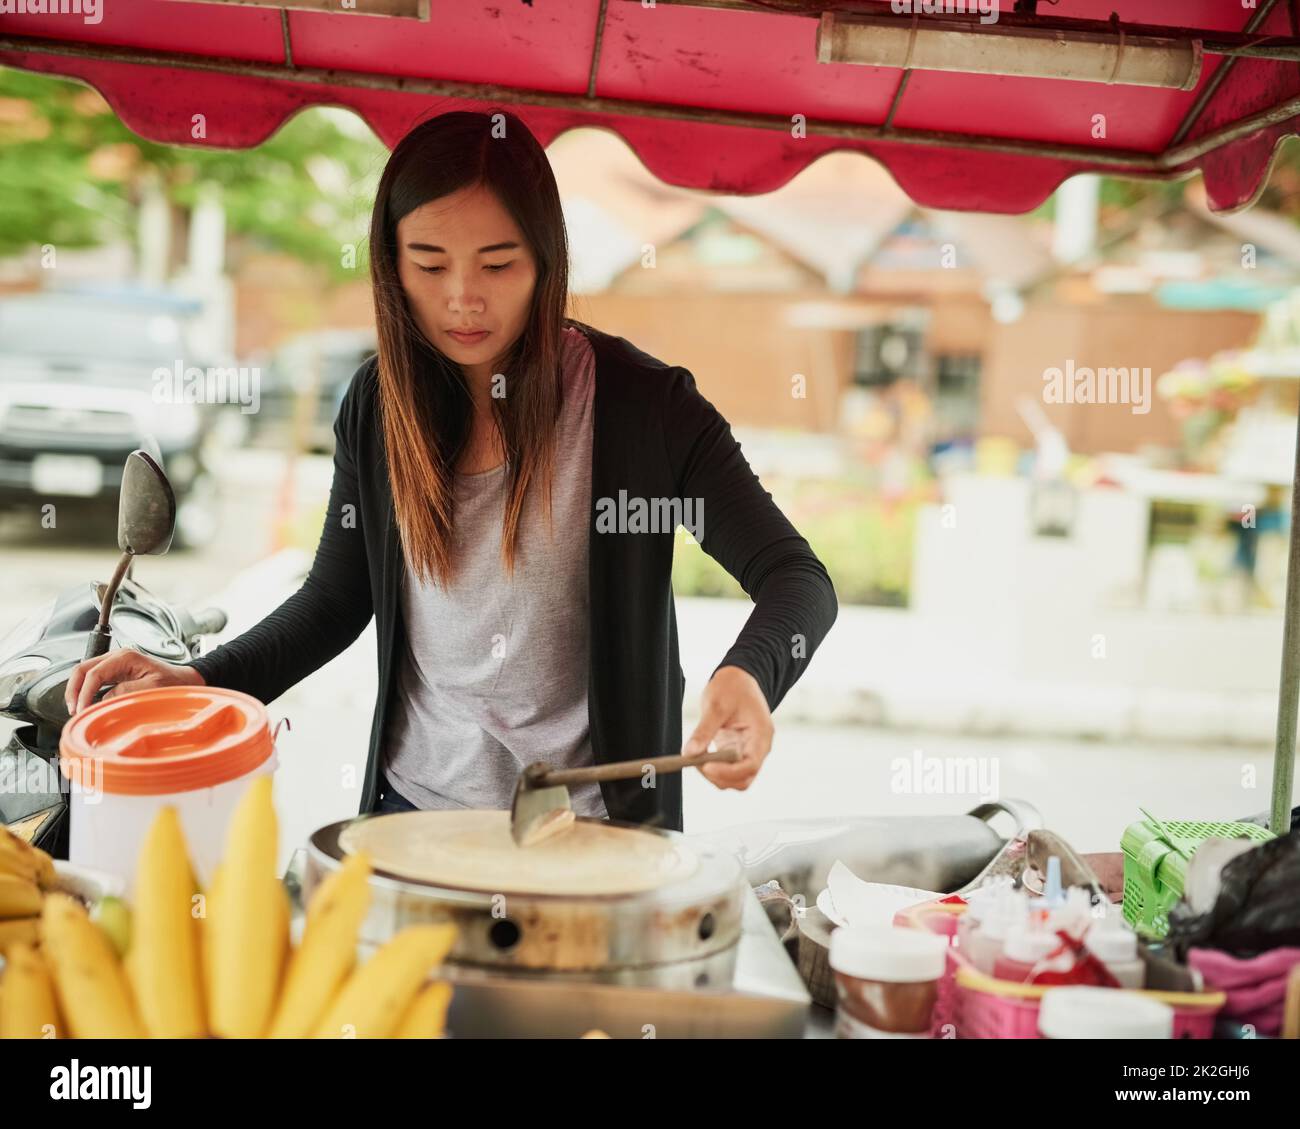 Coming right up. Shot of a food vendor in Thailand preparing a tasty snack. Stock Photo